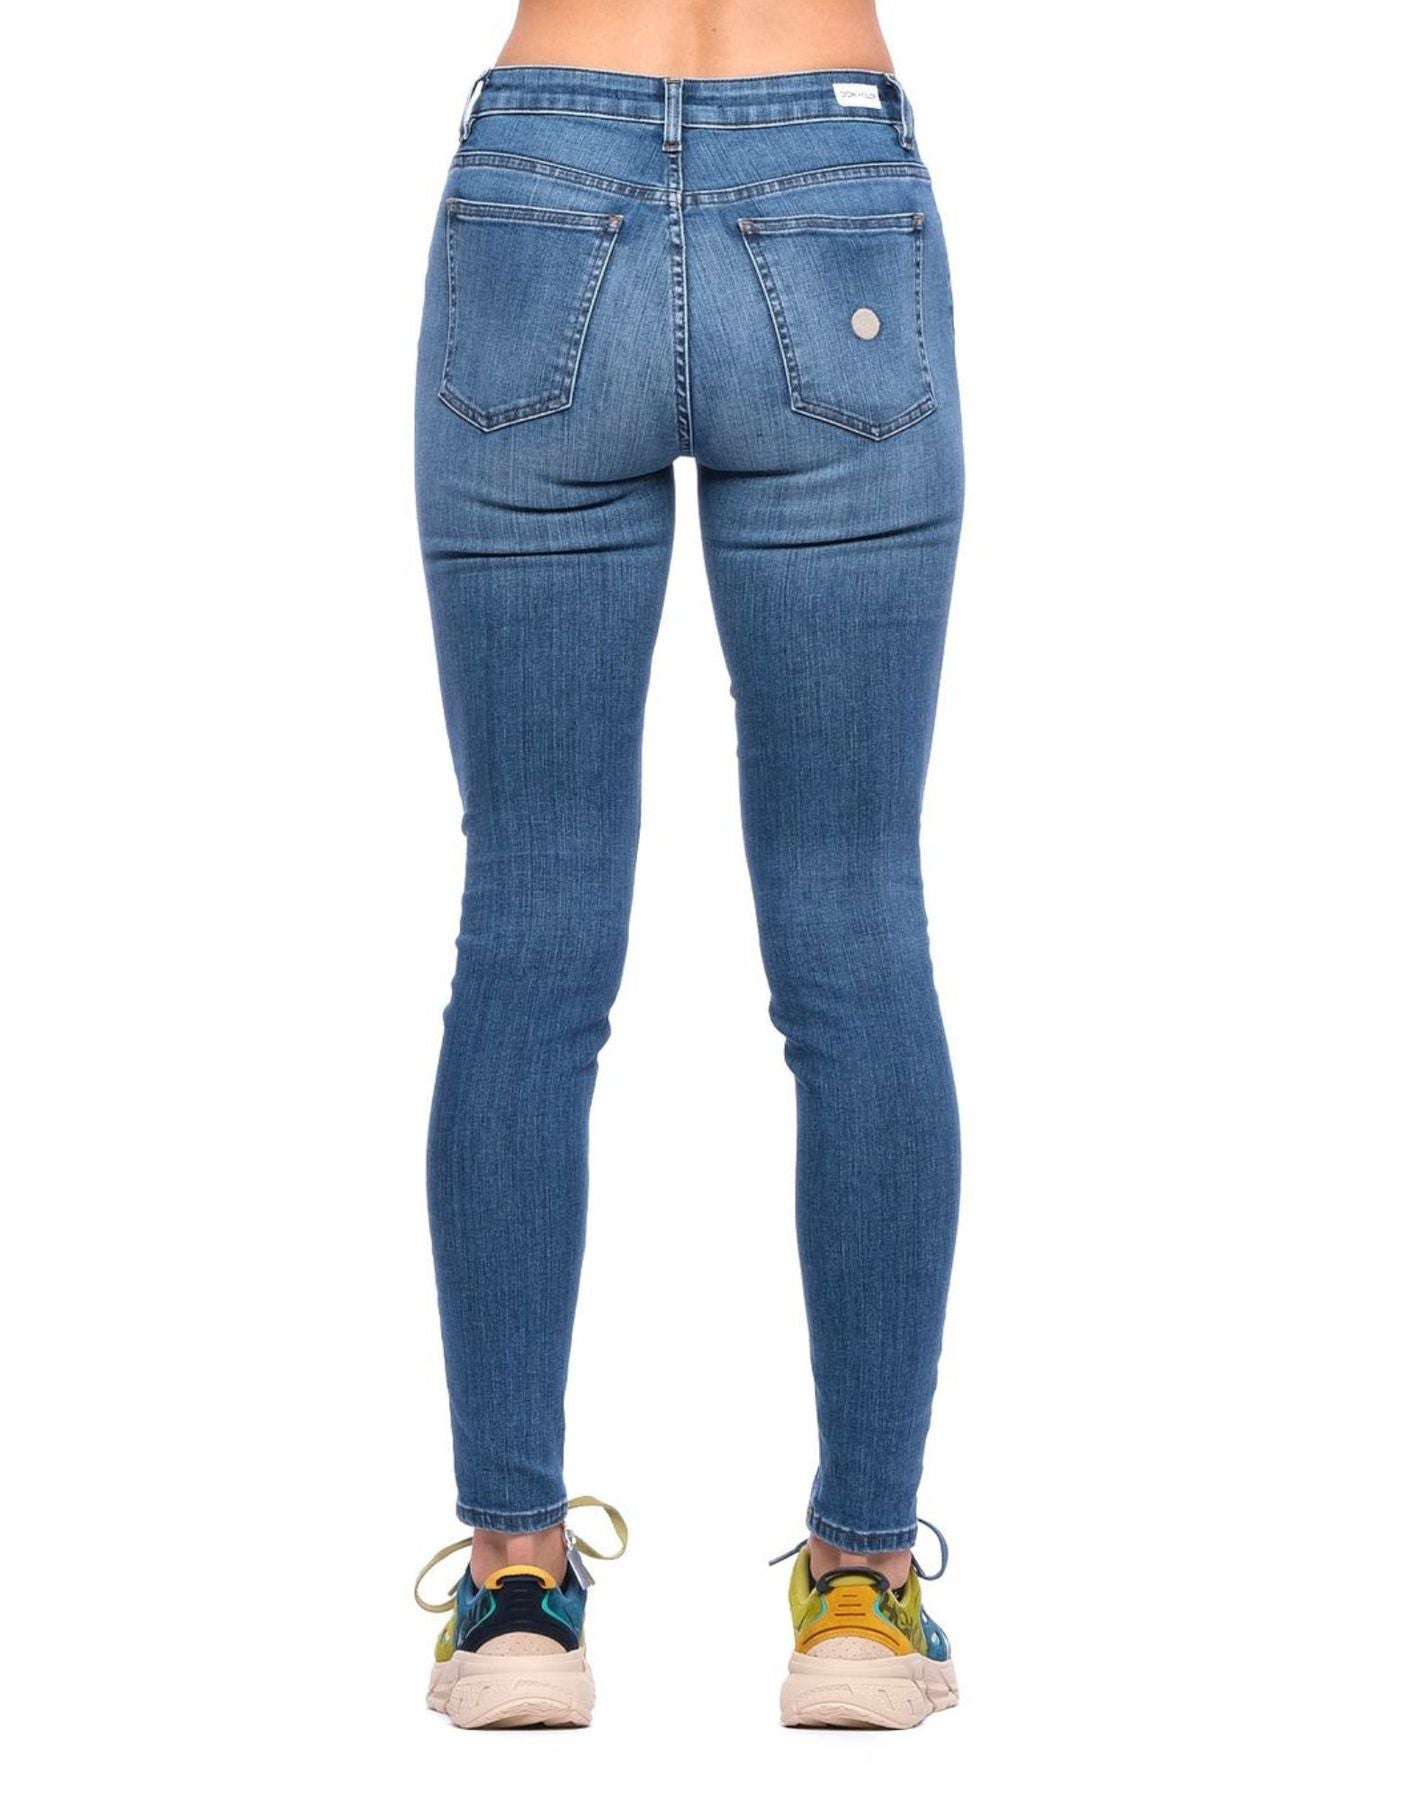 Jeans for women DON THE FULLER CANNES DTF28B 902